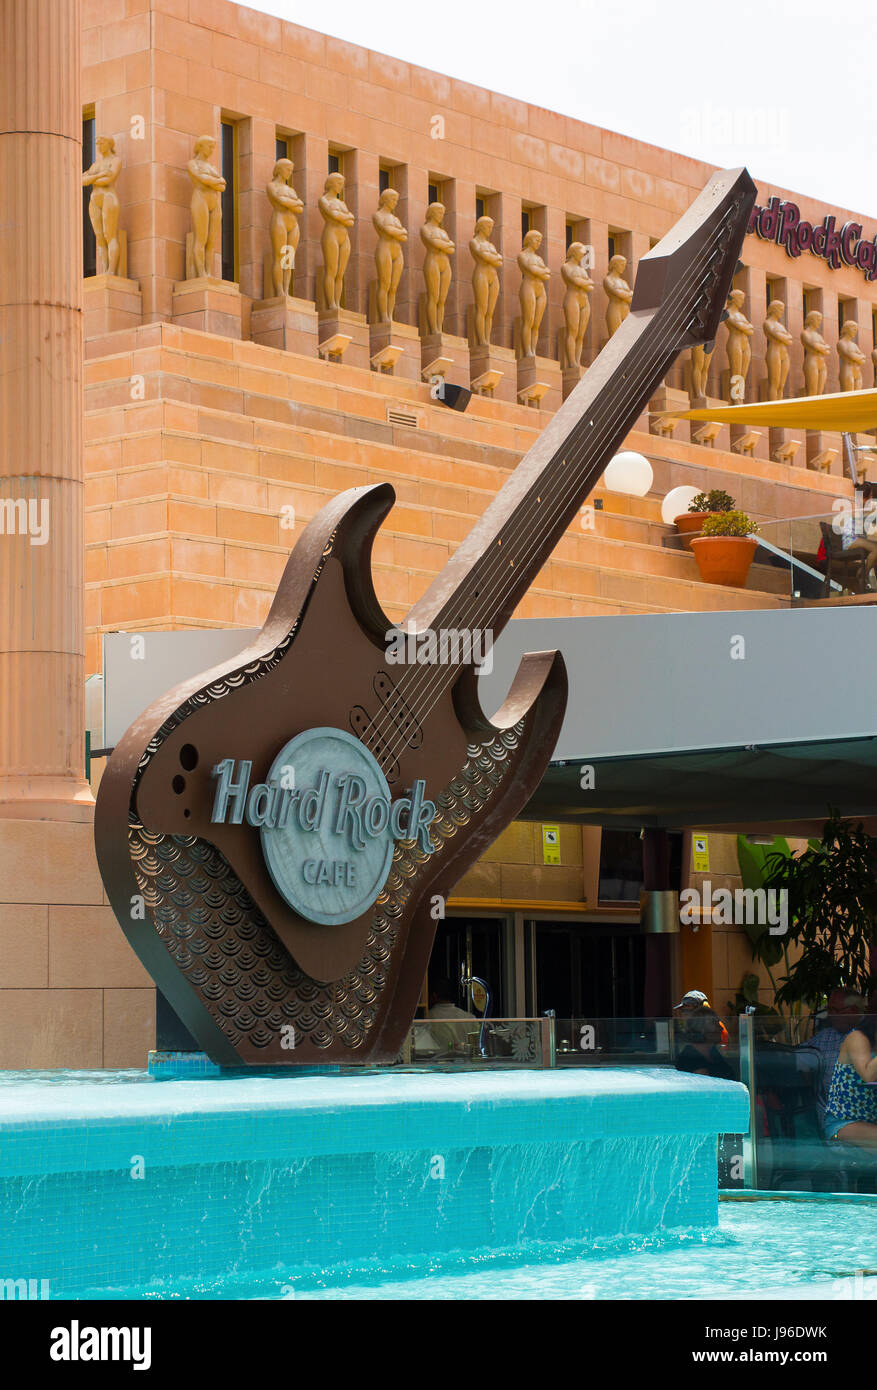 The huge replica electric guitar structure in the water feature at the entrance to the Hard Rock Cafe in Playa Las Americas in Teneriffe Stock Photo